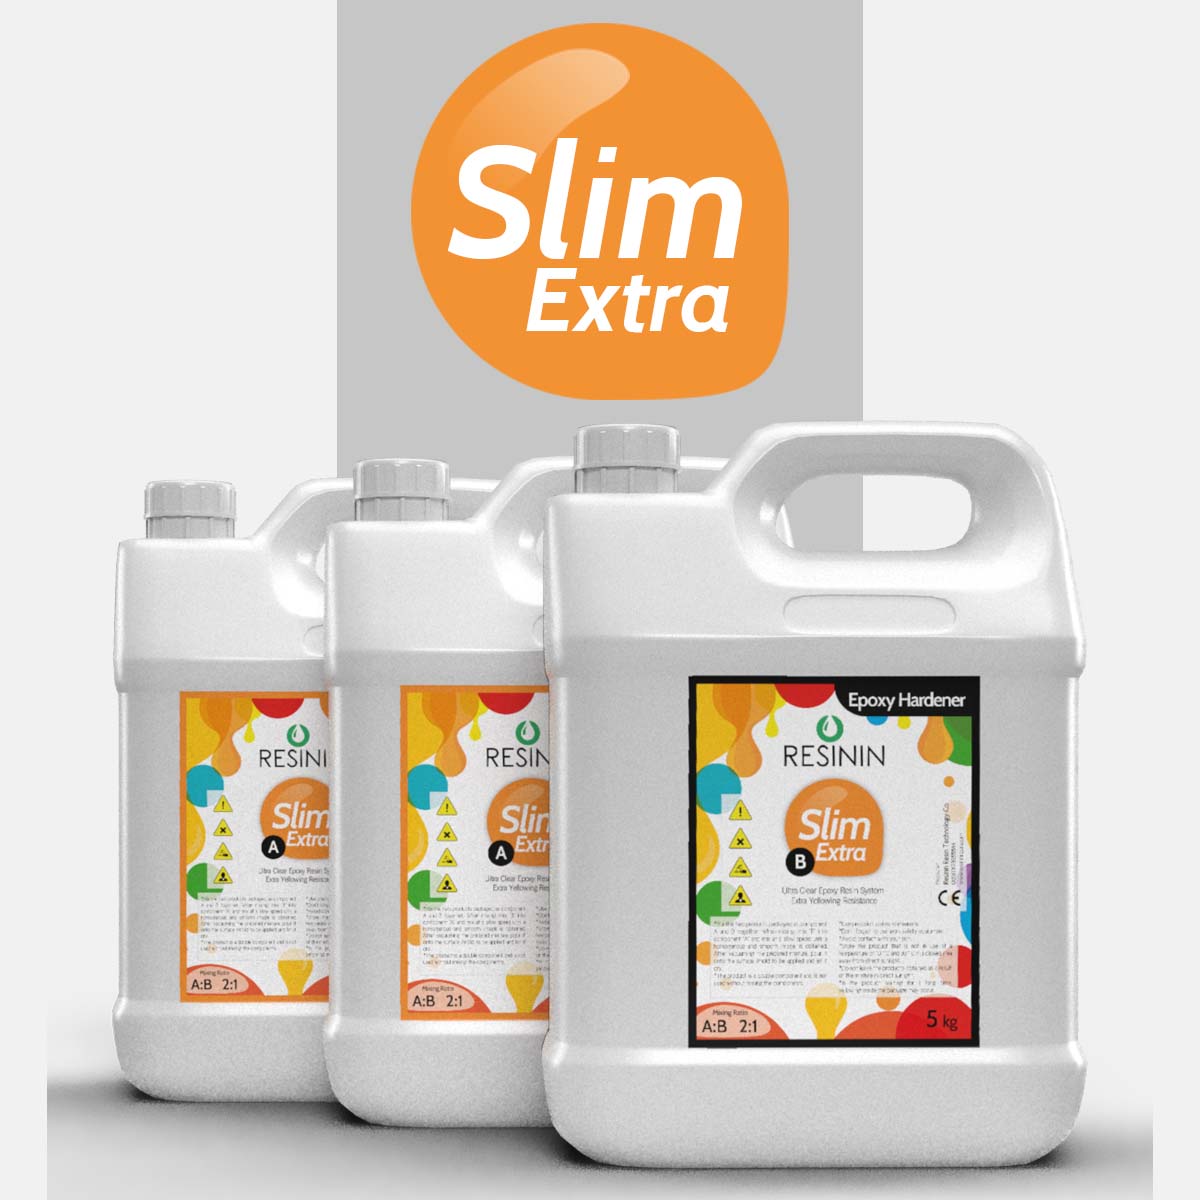 Slim Extra Ultra Clear Epoxy Resin for Small Volume Applications - Bestista